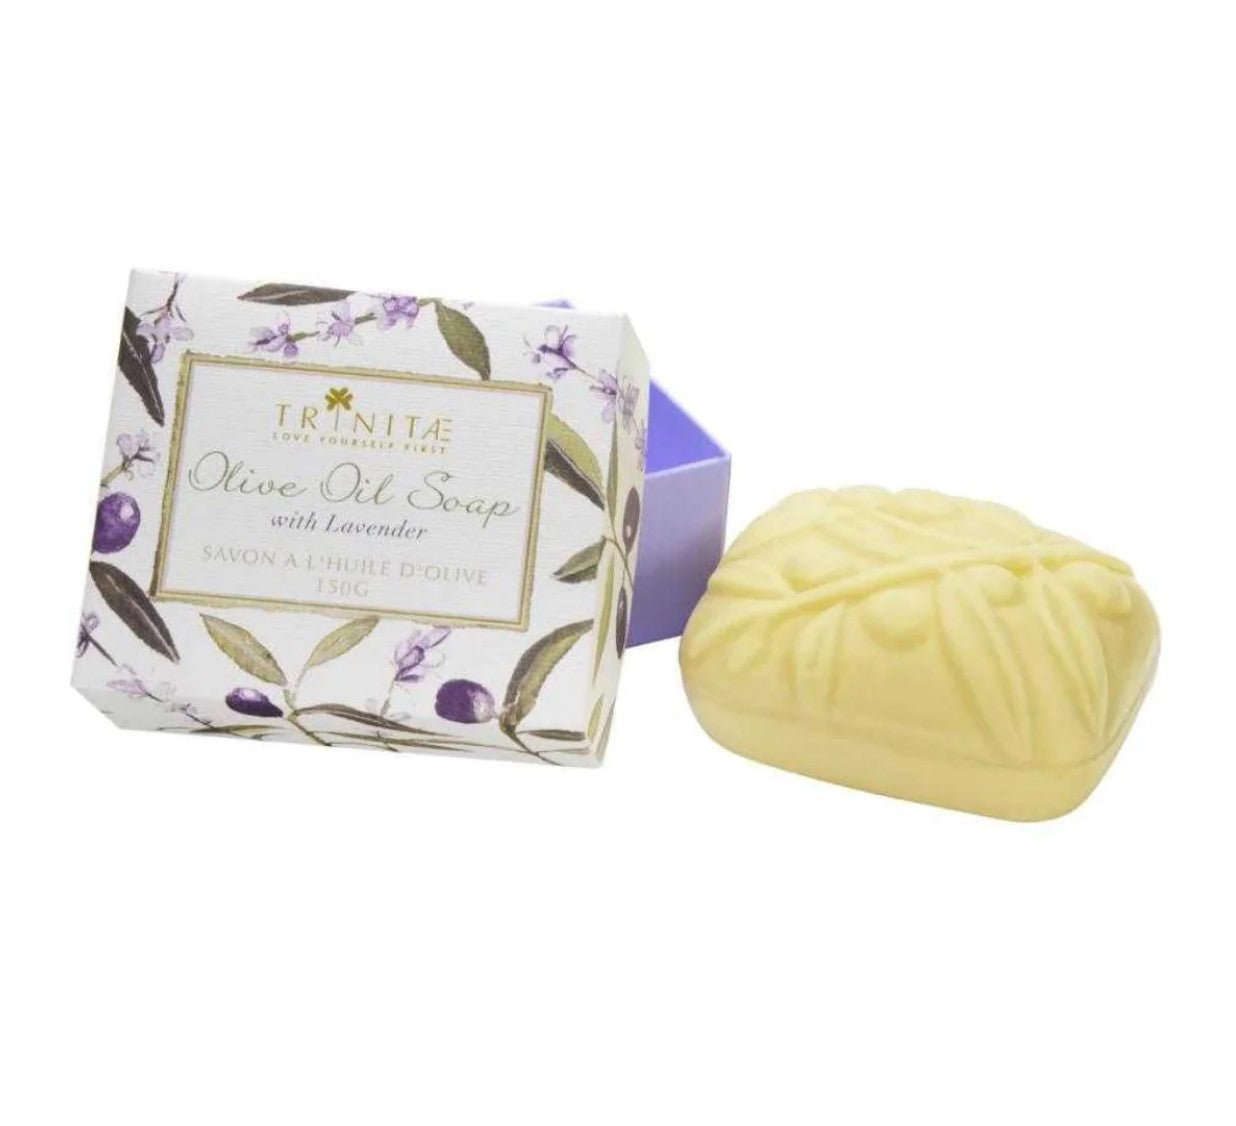 Olive oil soap with Lavender